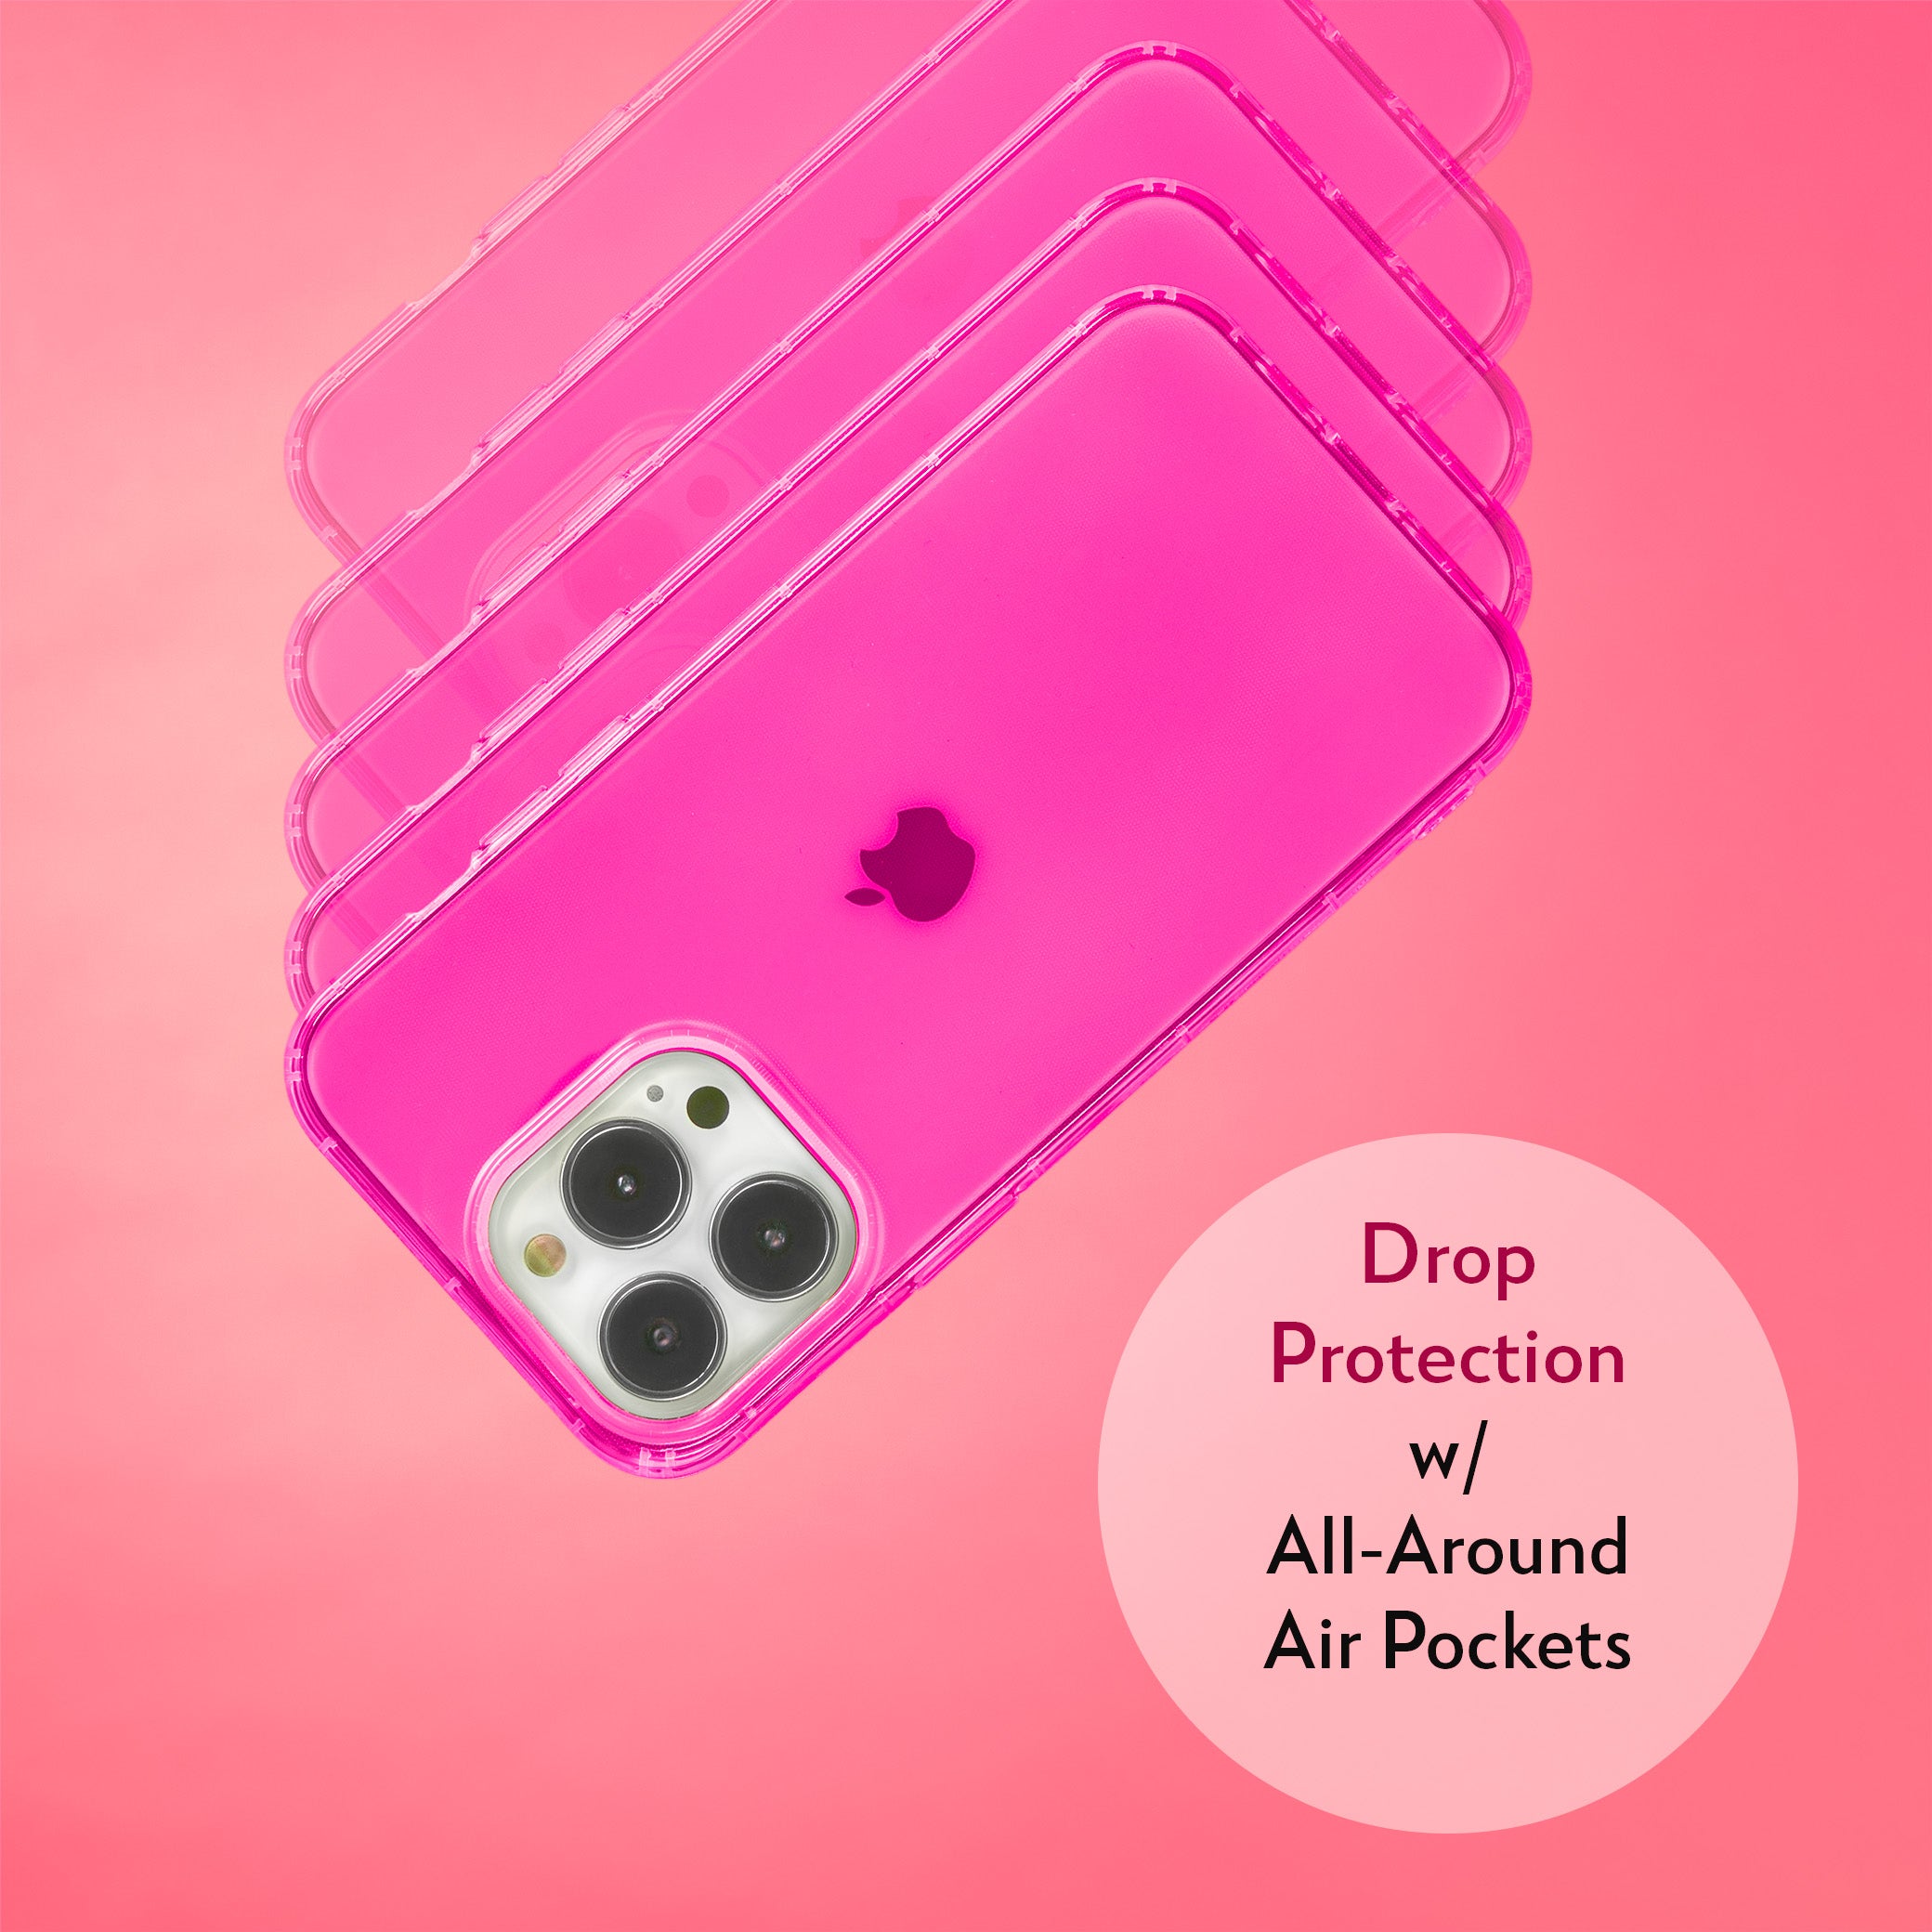 Highlighter Case for iPhone 13 Pro - Eye-Catching Hot Pink